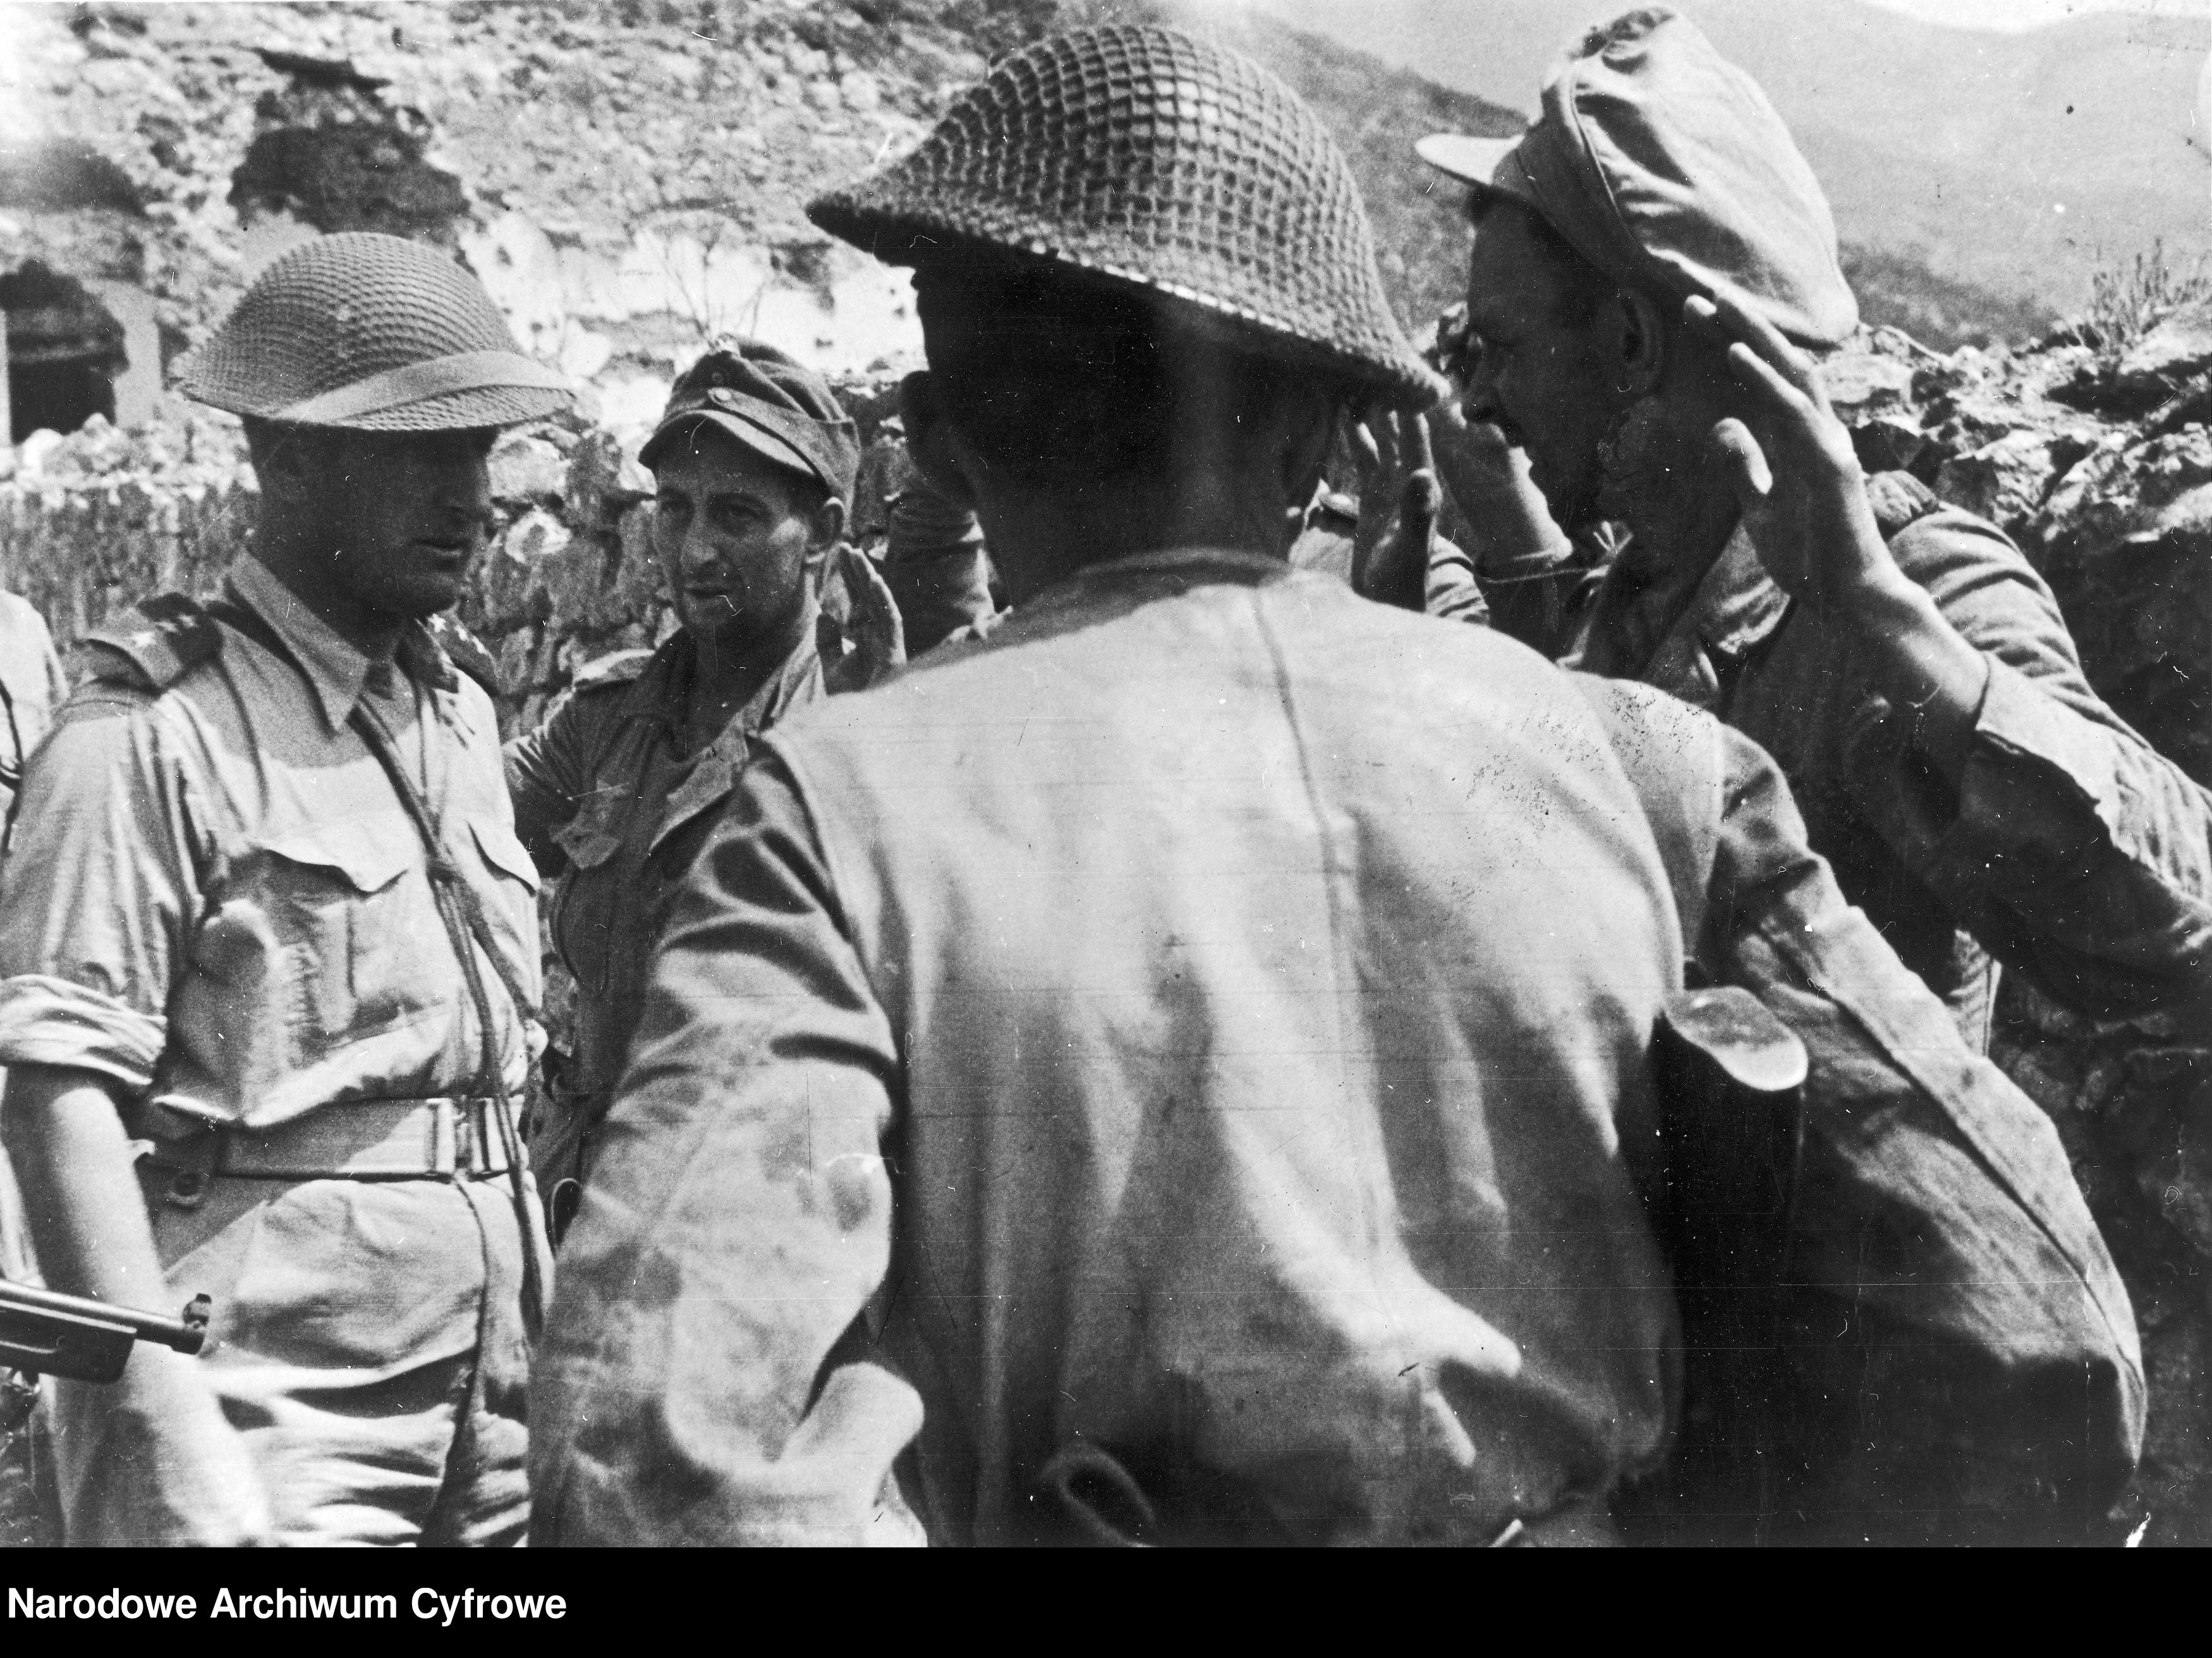 <p class='eng'>1944/05/25<br />Capt. Weiss (1st from the left) interrogates German prisoners of war pulled out of the buried bunker.<br />NAC 3/24/0/-/457/11</p>